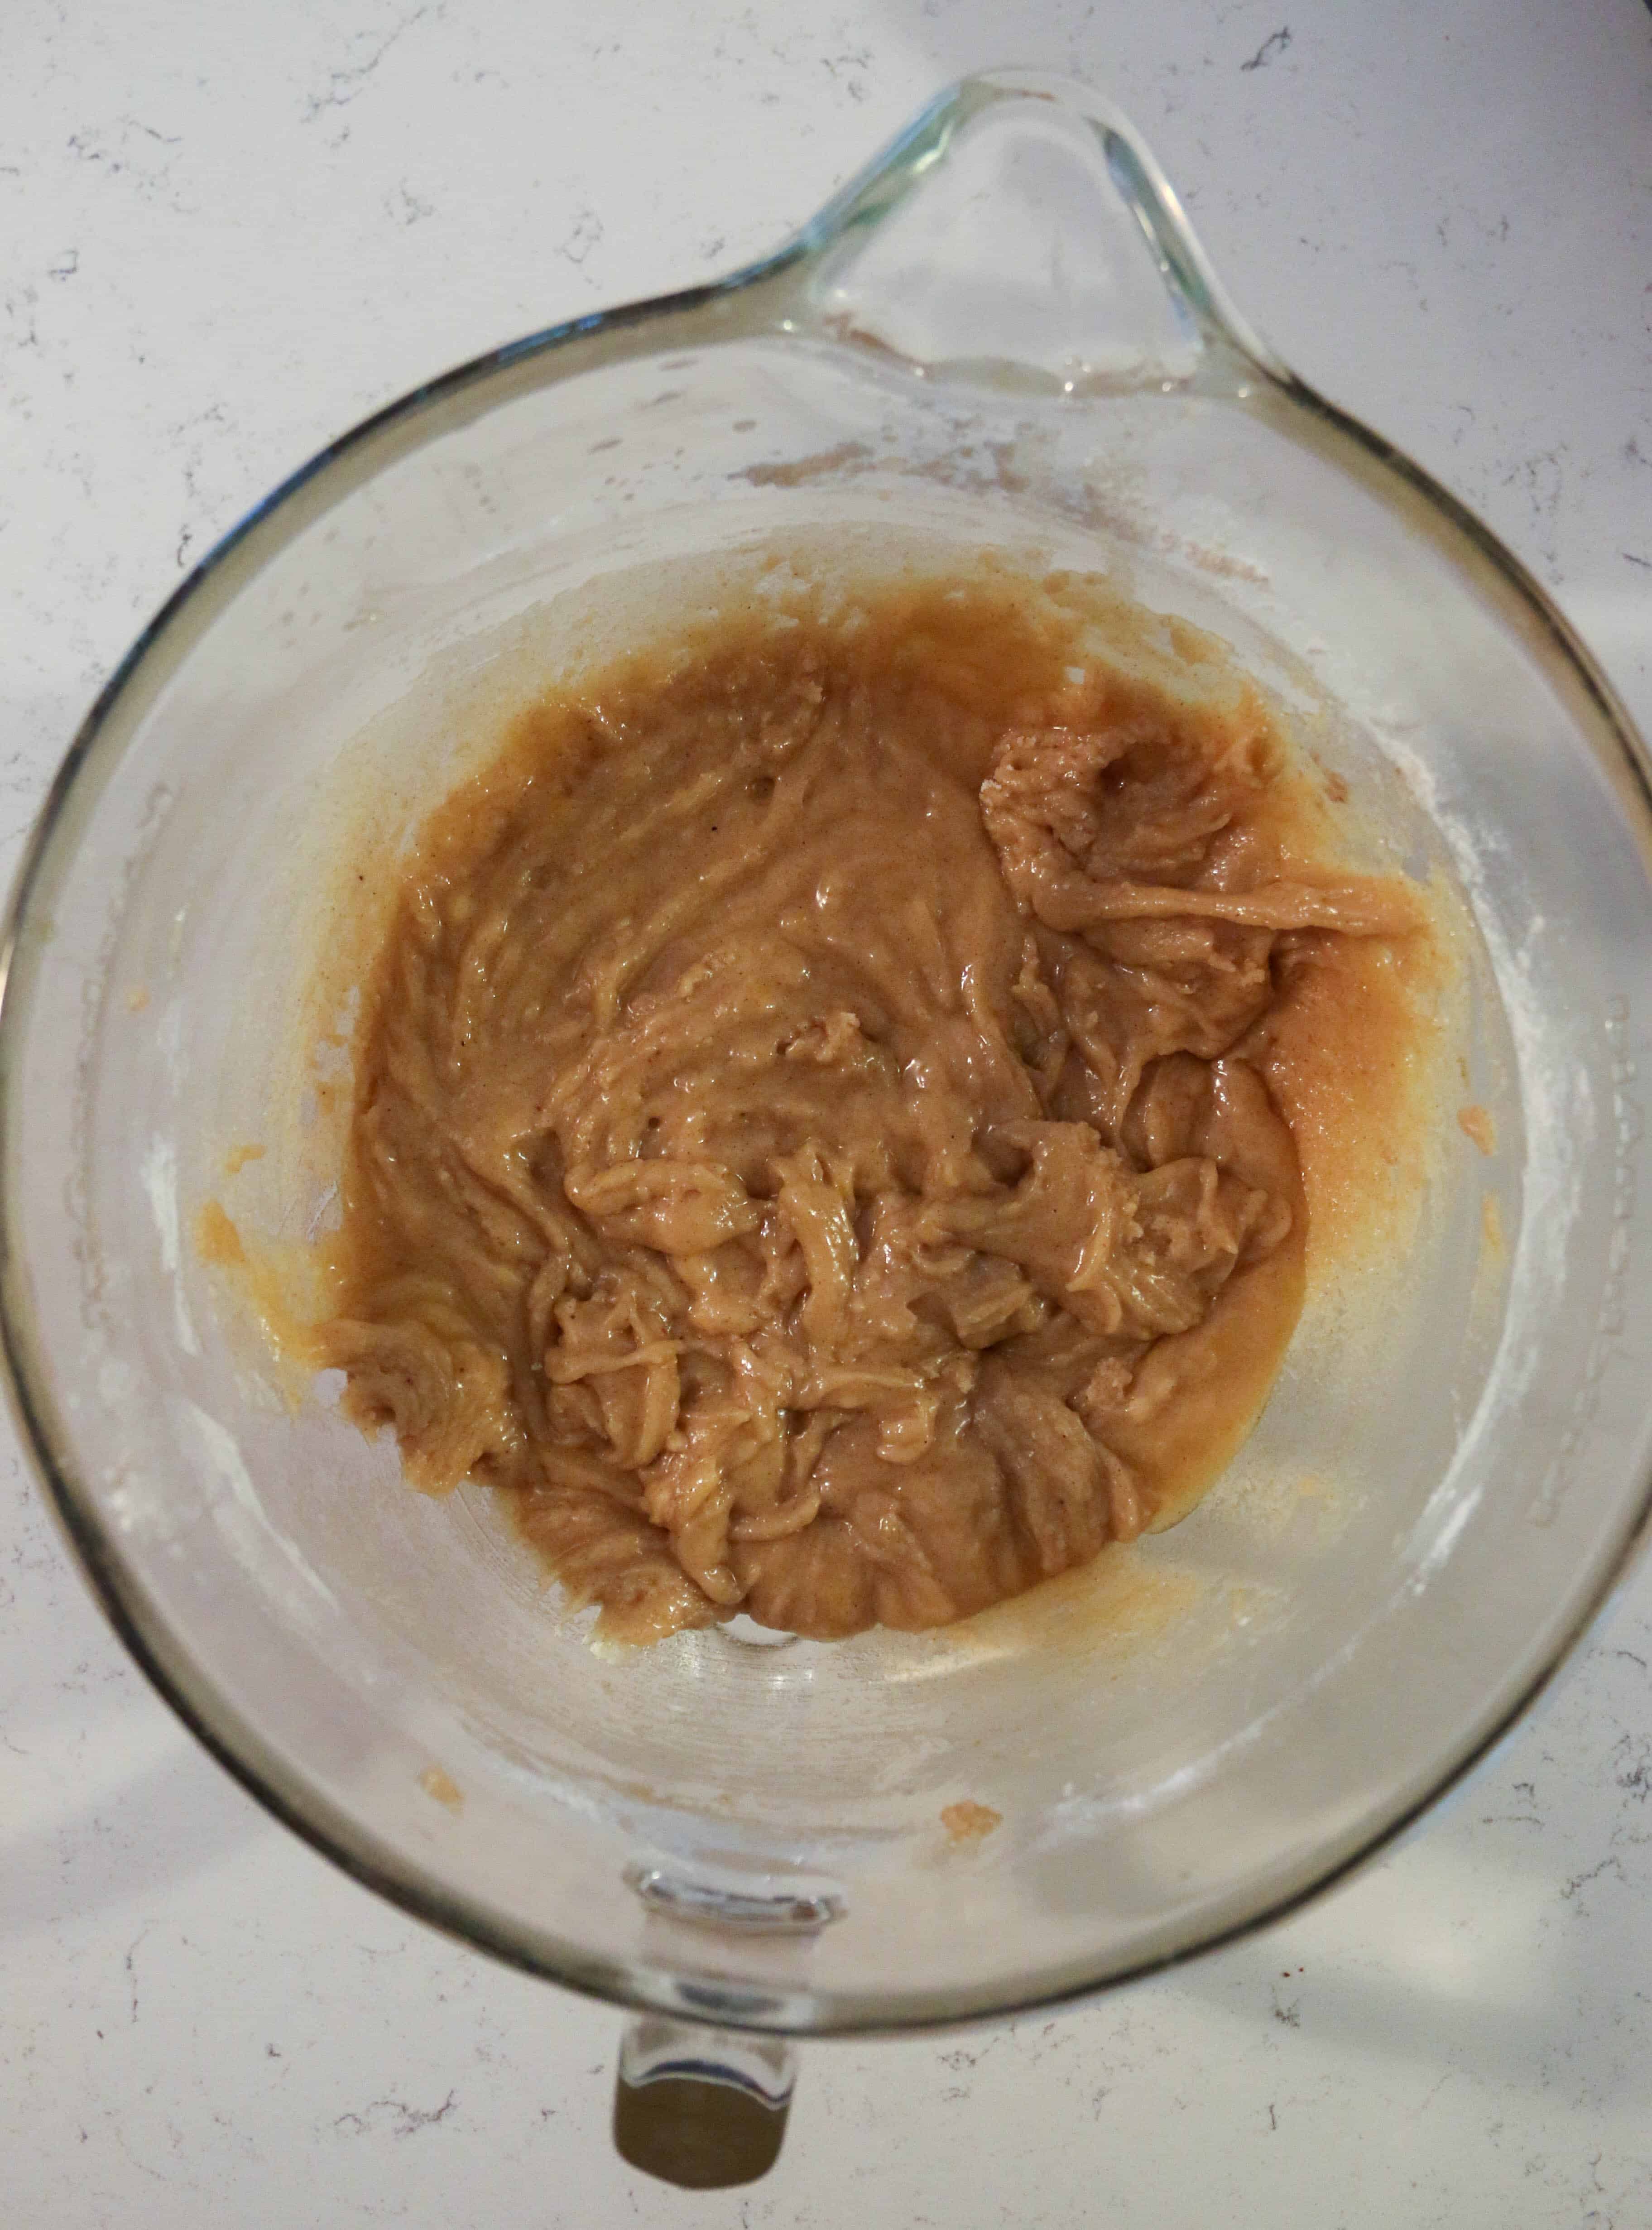 apple dapple cake batter without apples or nuts